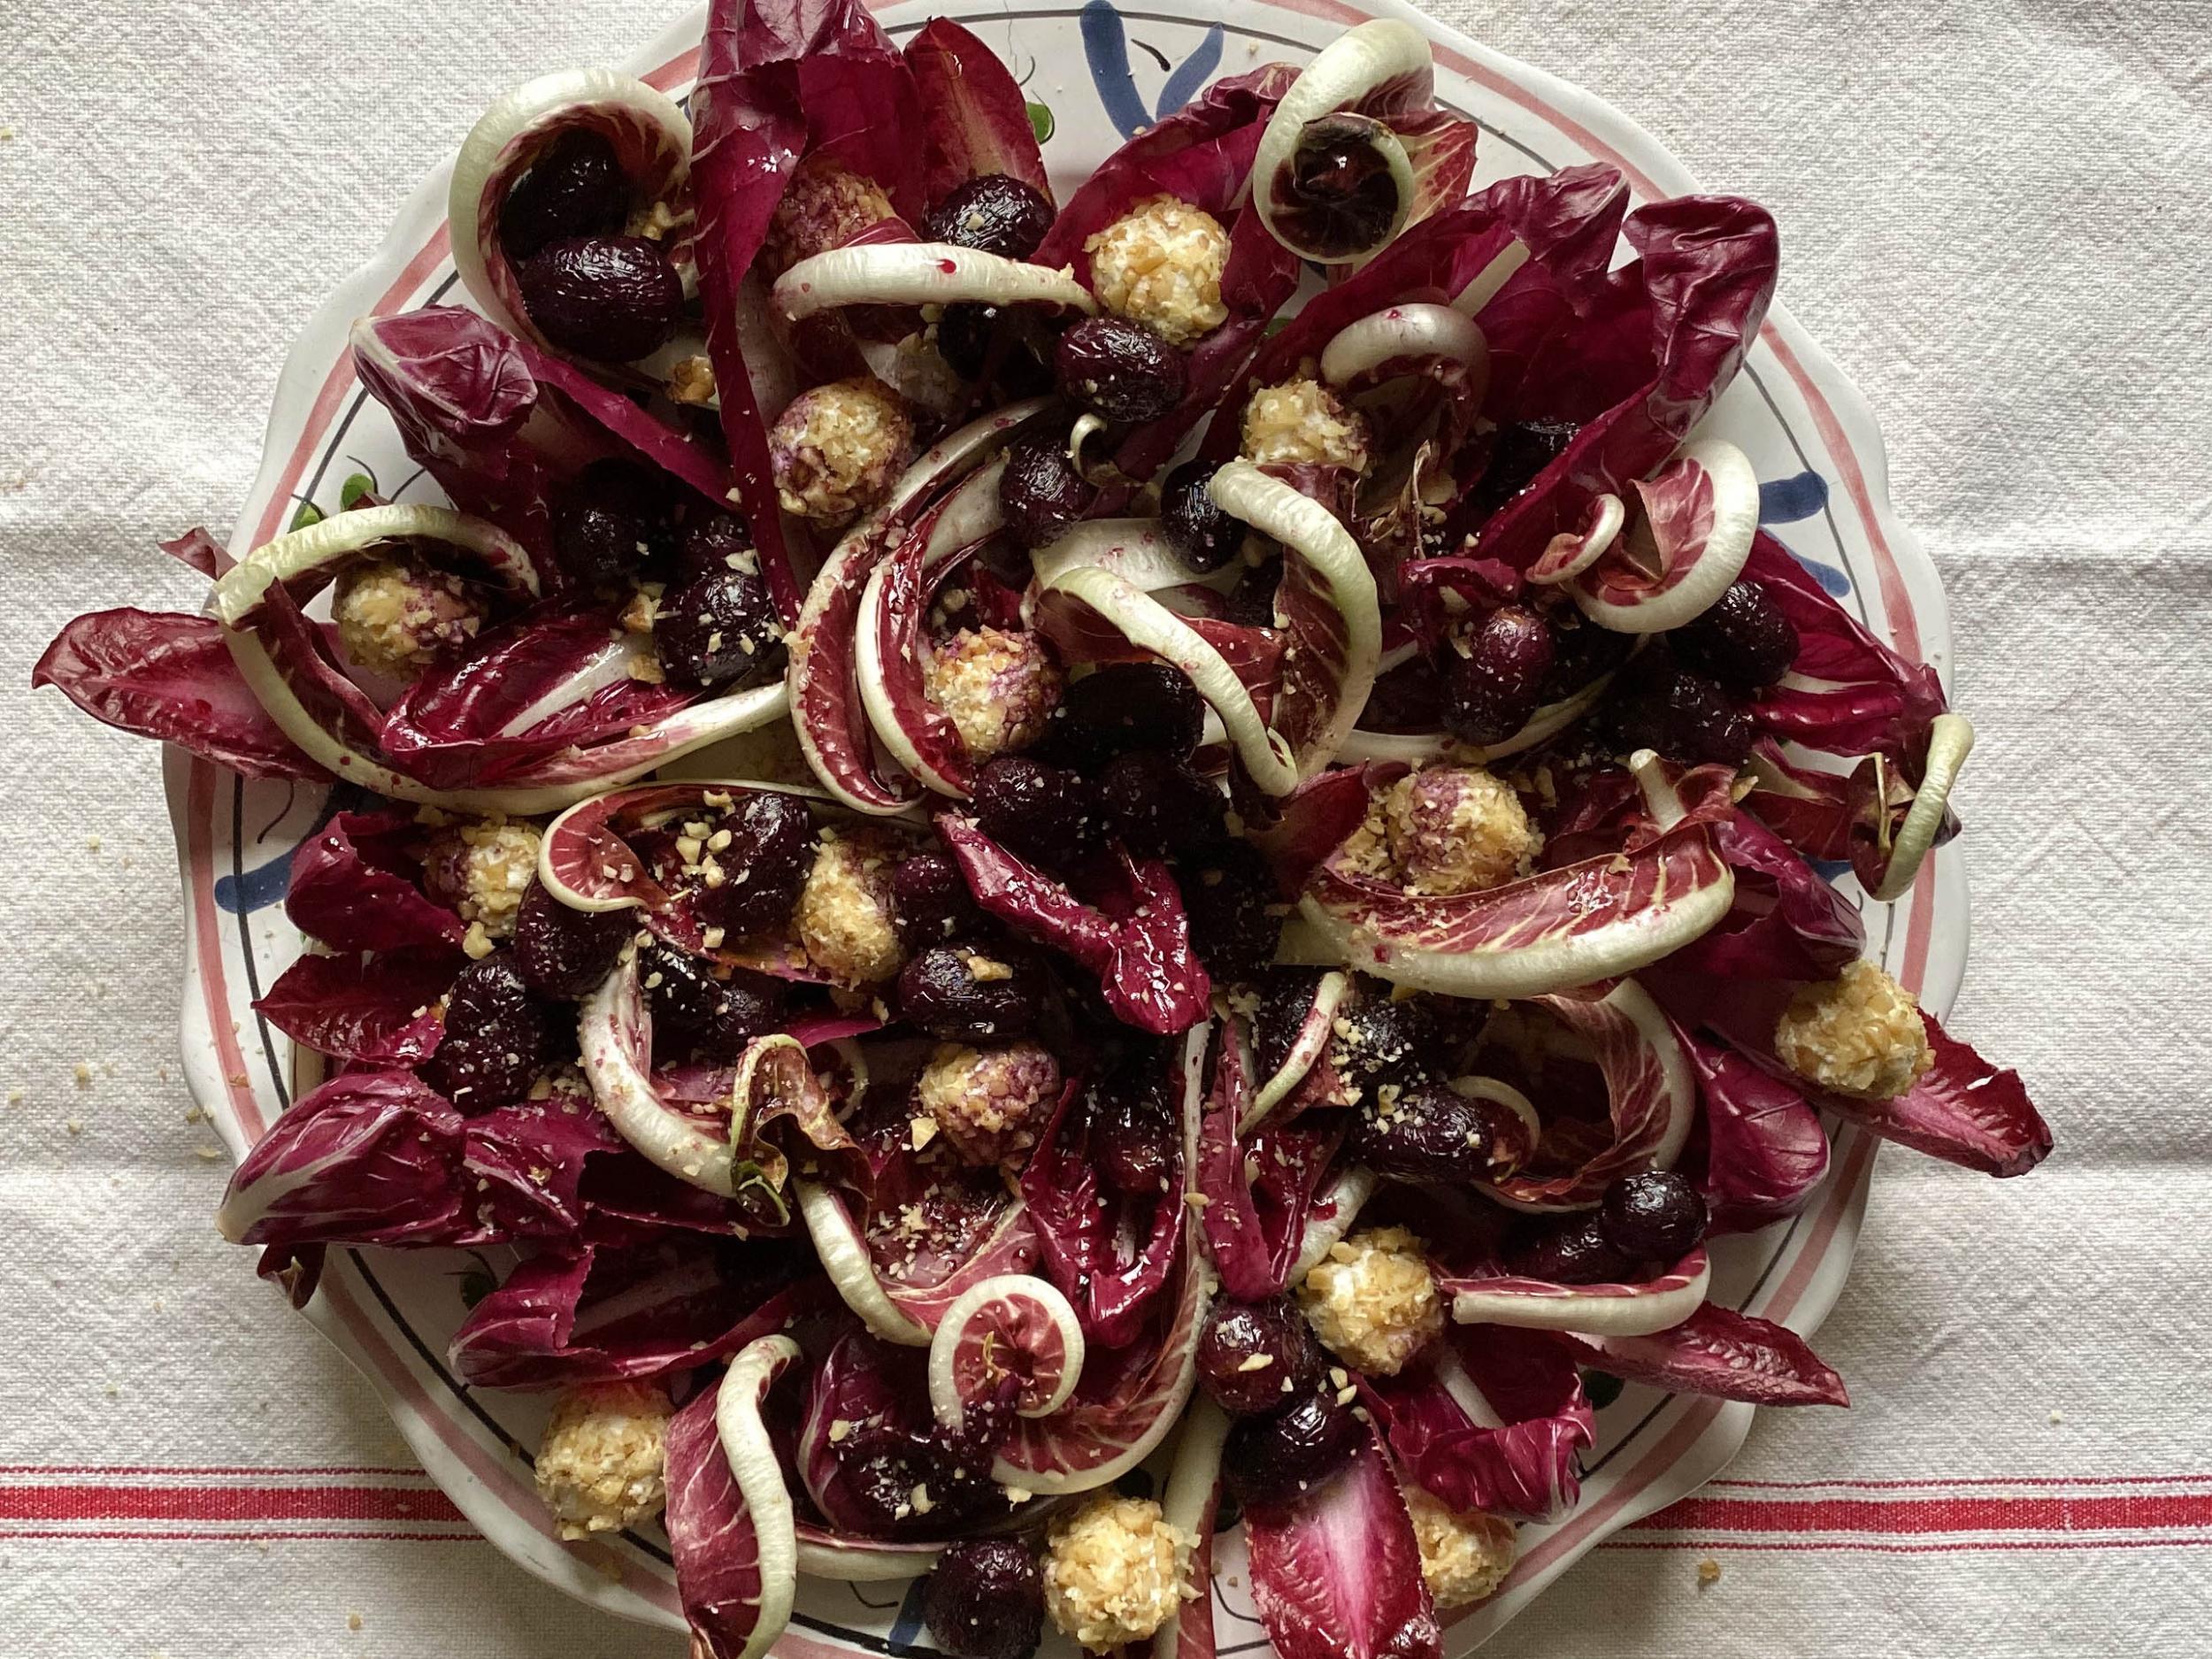 Radicchio’s bitterness pairs well with rich meat dishes